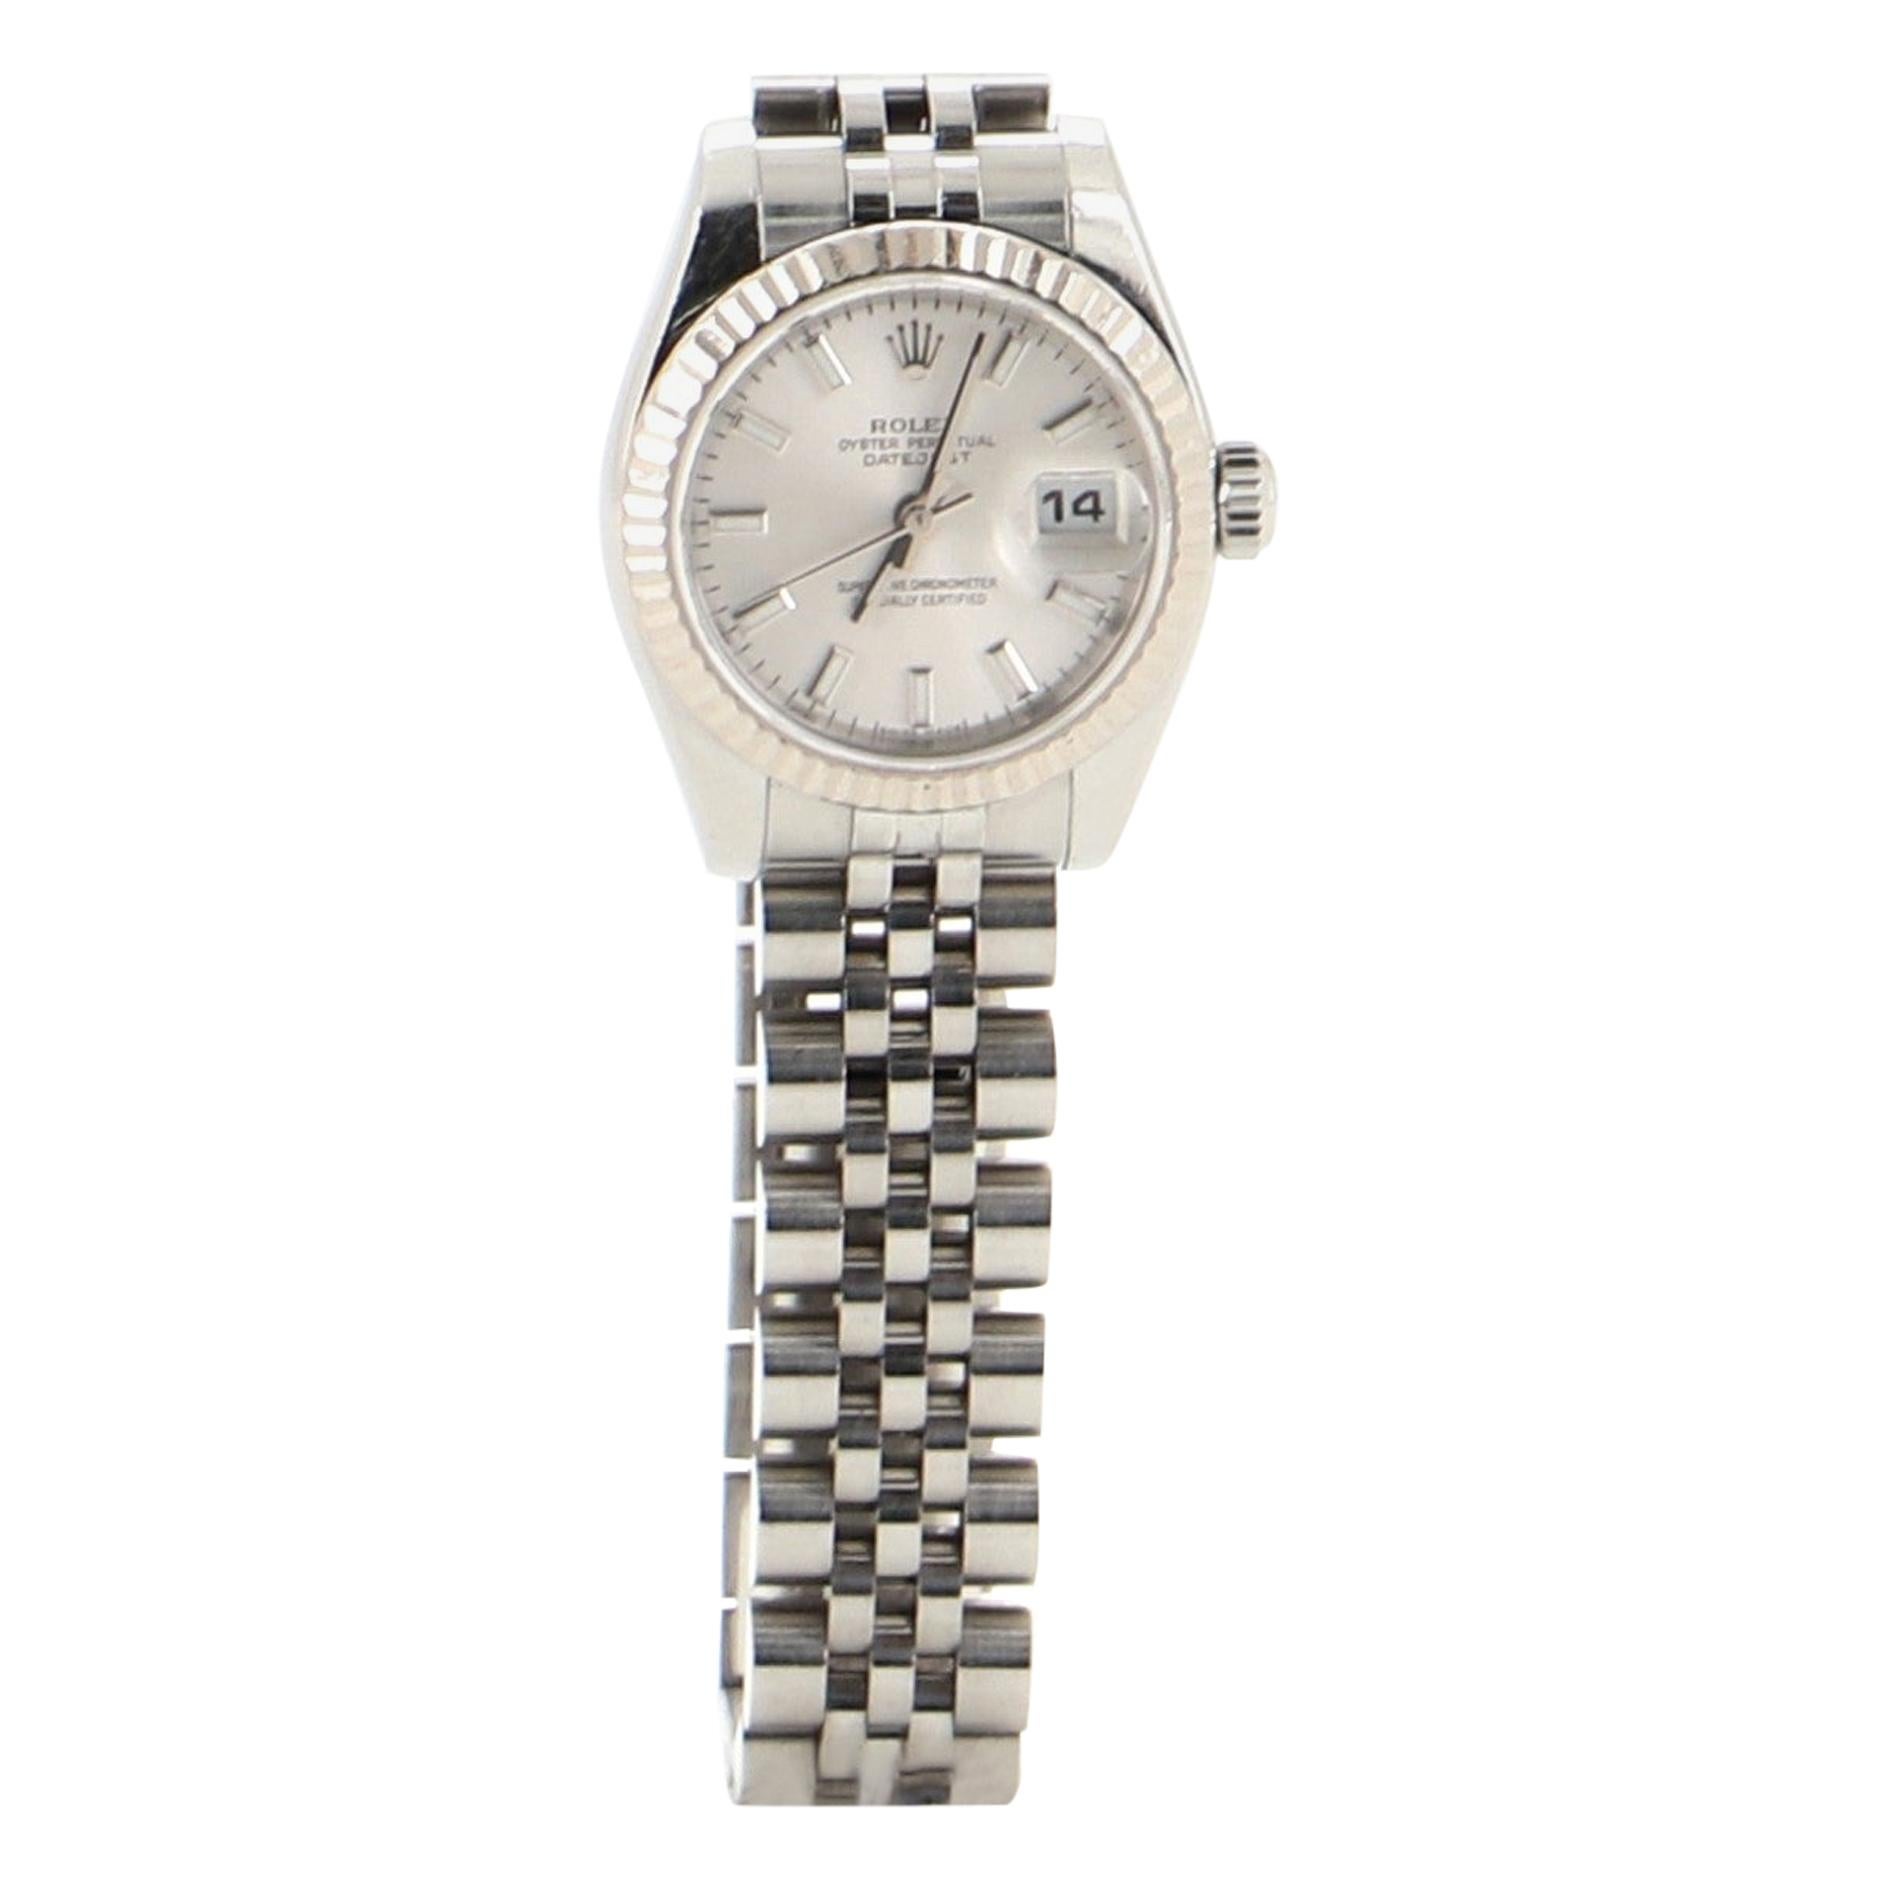 Rolex Oyster Perpetual Datejust Automatic Watch Stainless Steel and White Gold 2